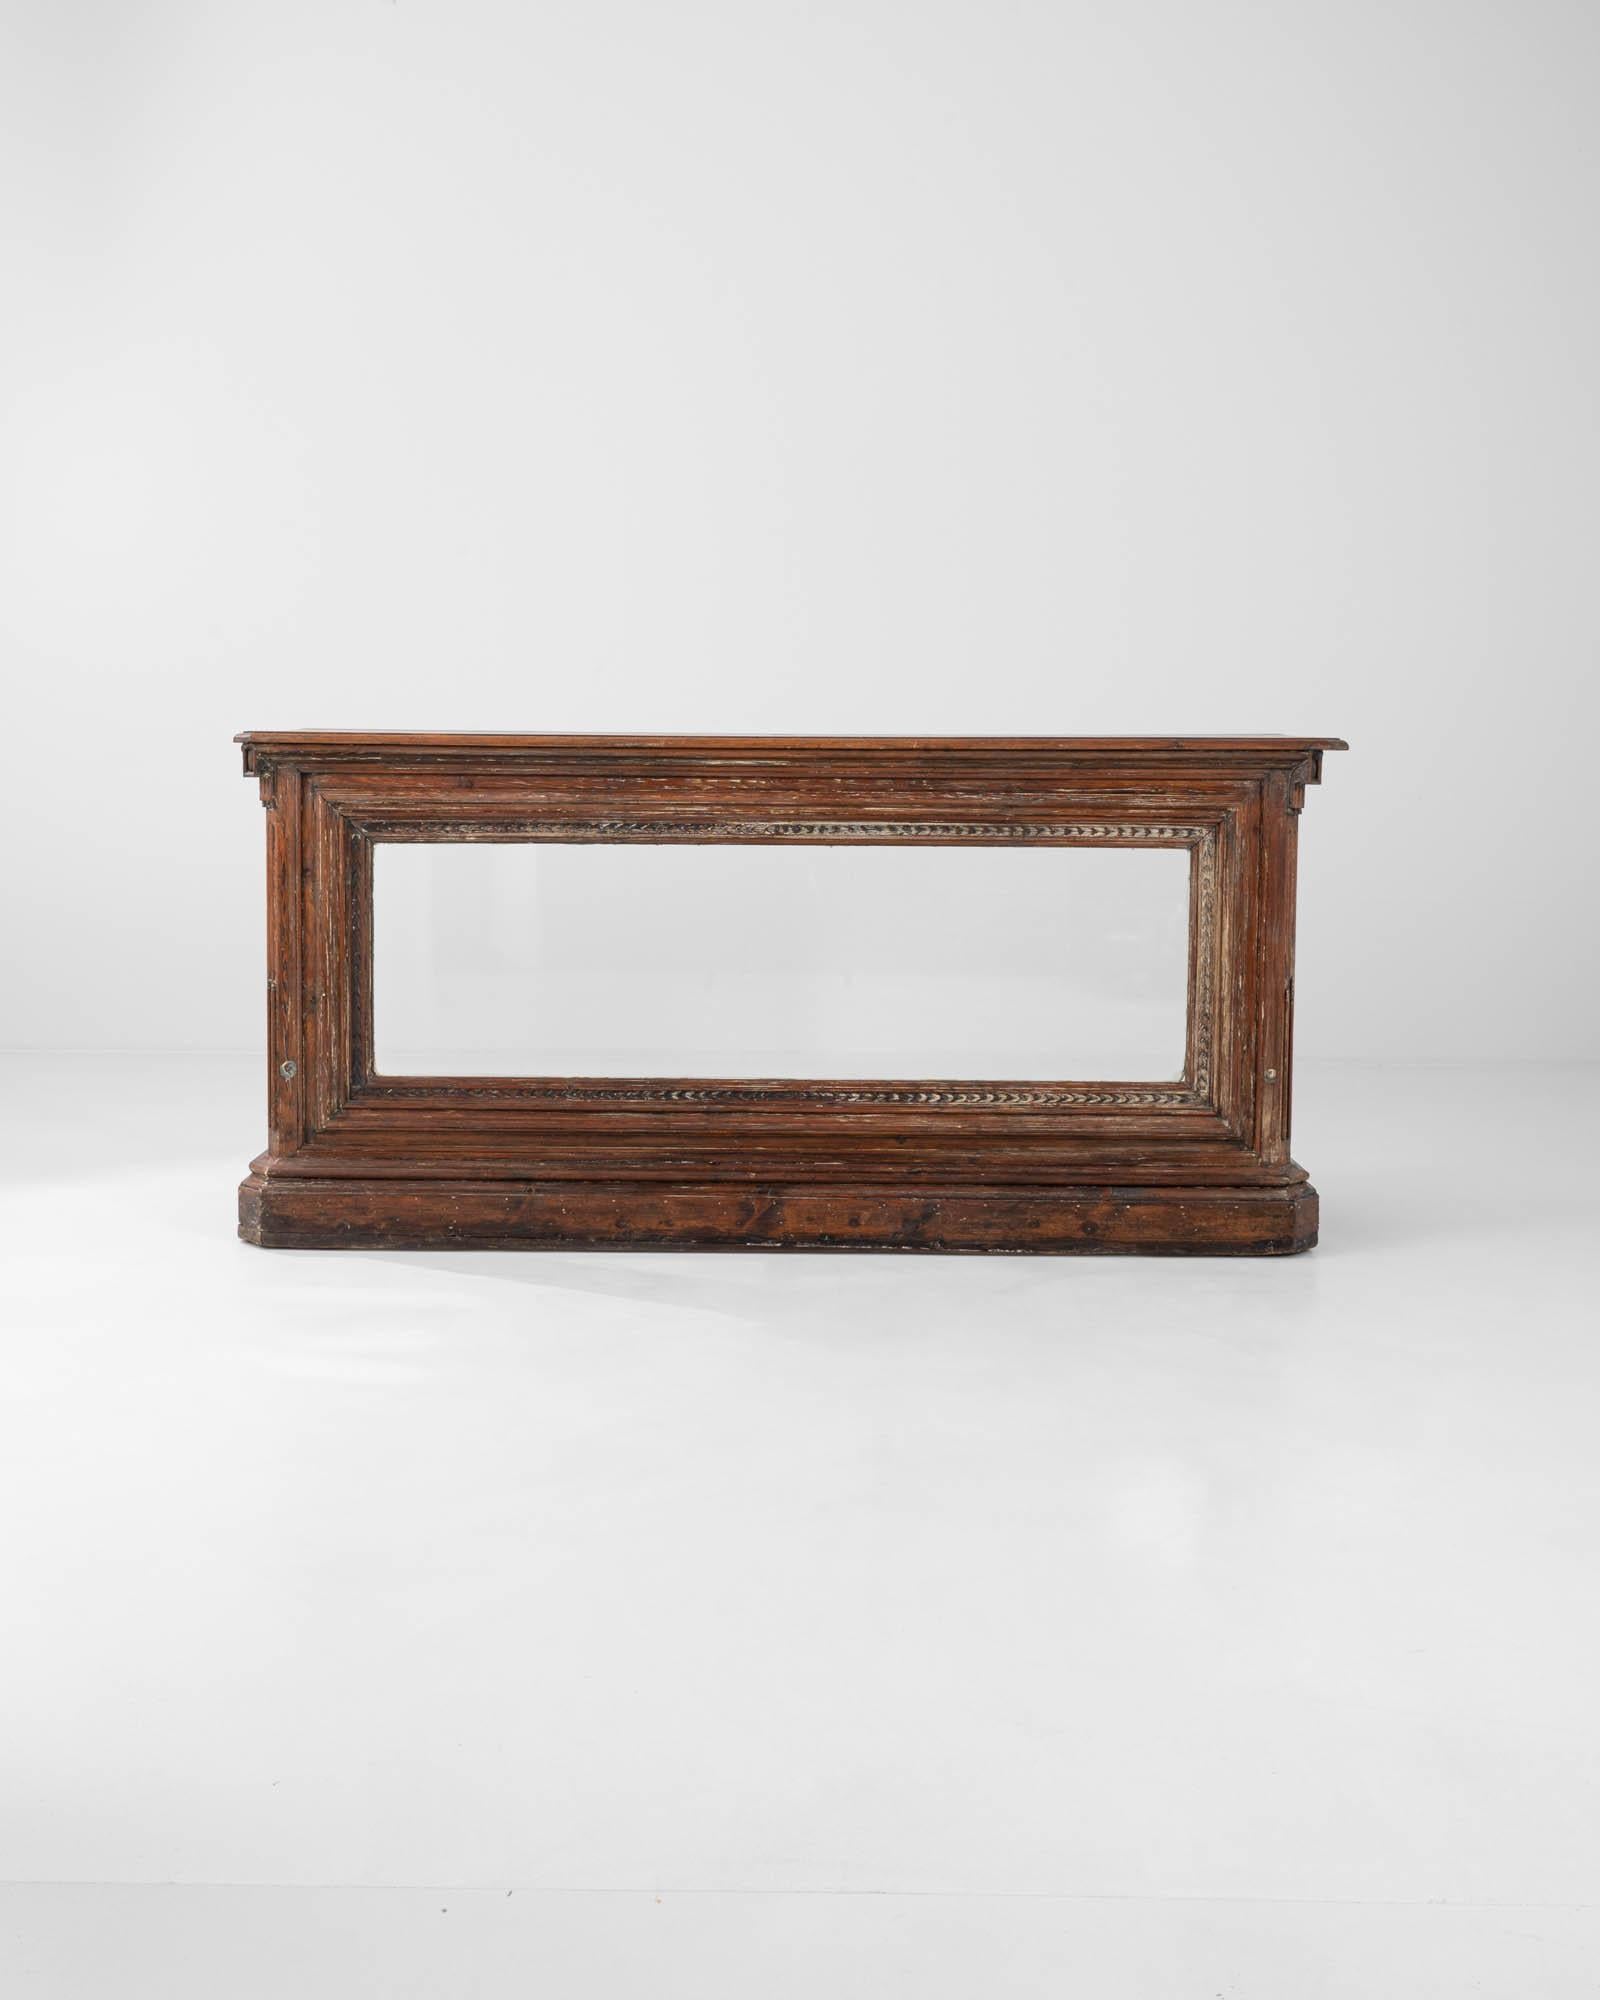 This exquisite antique counter was handcrafted in 19th-century France. It features transparent glass panels with a refined wooden case, offering a perfect view into the bar's interior. The sturdy plinth base, with beveled corners, combined with